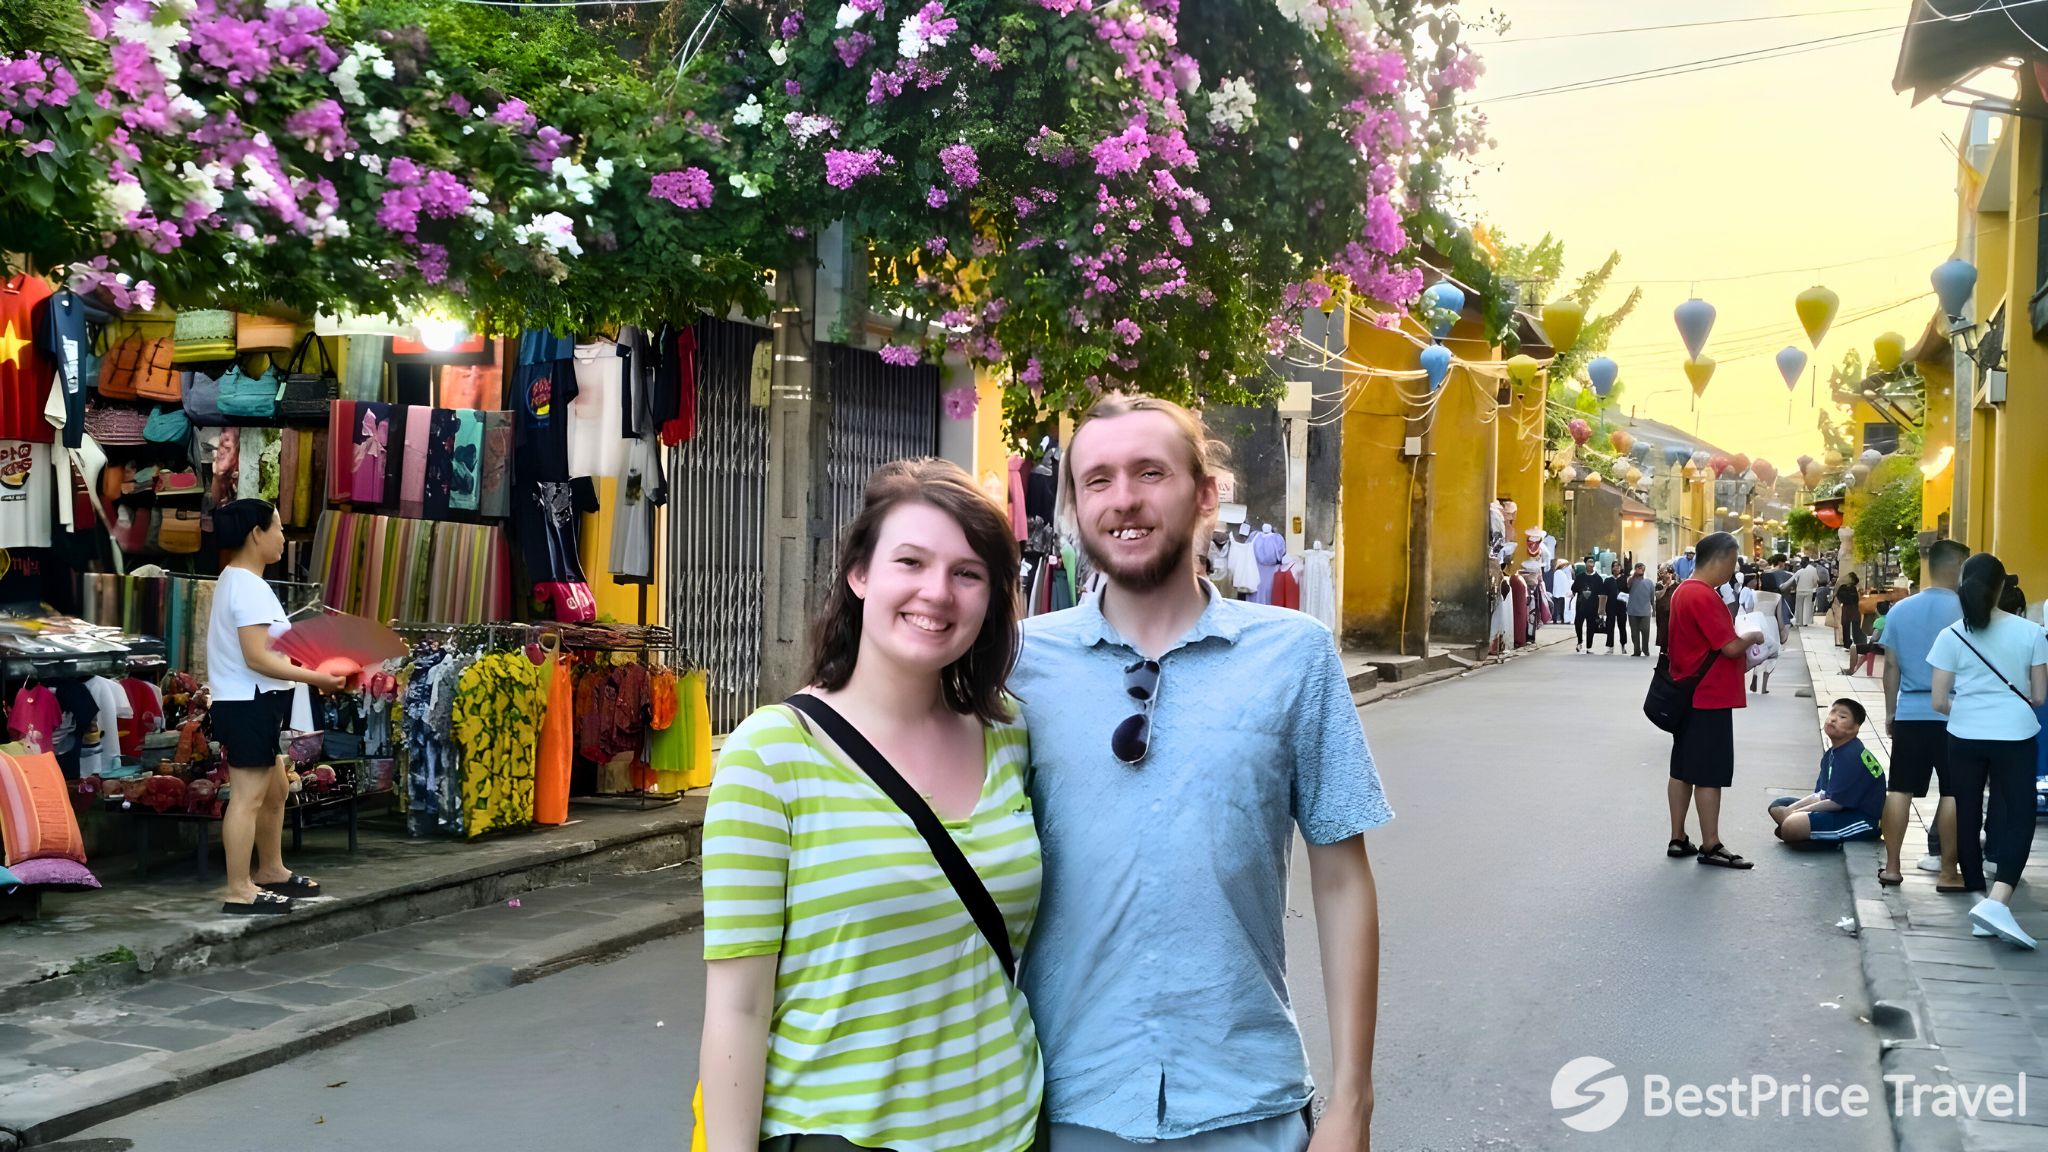 Day 5 6 Feel Free To Explore The Hidden Gems Of Hoi An